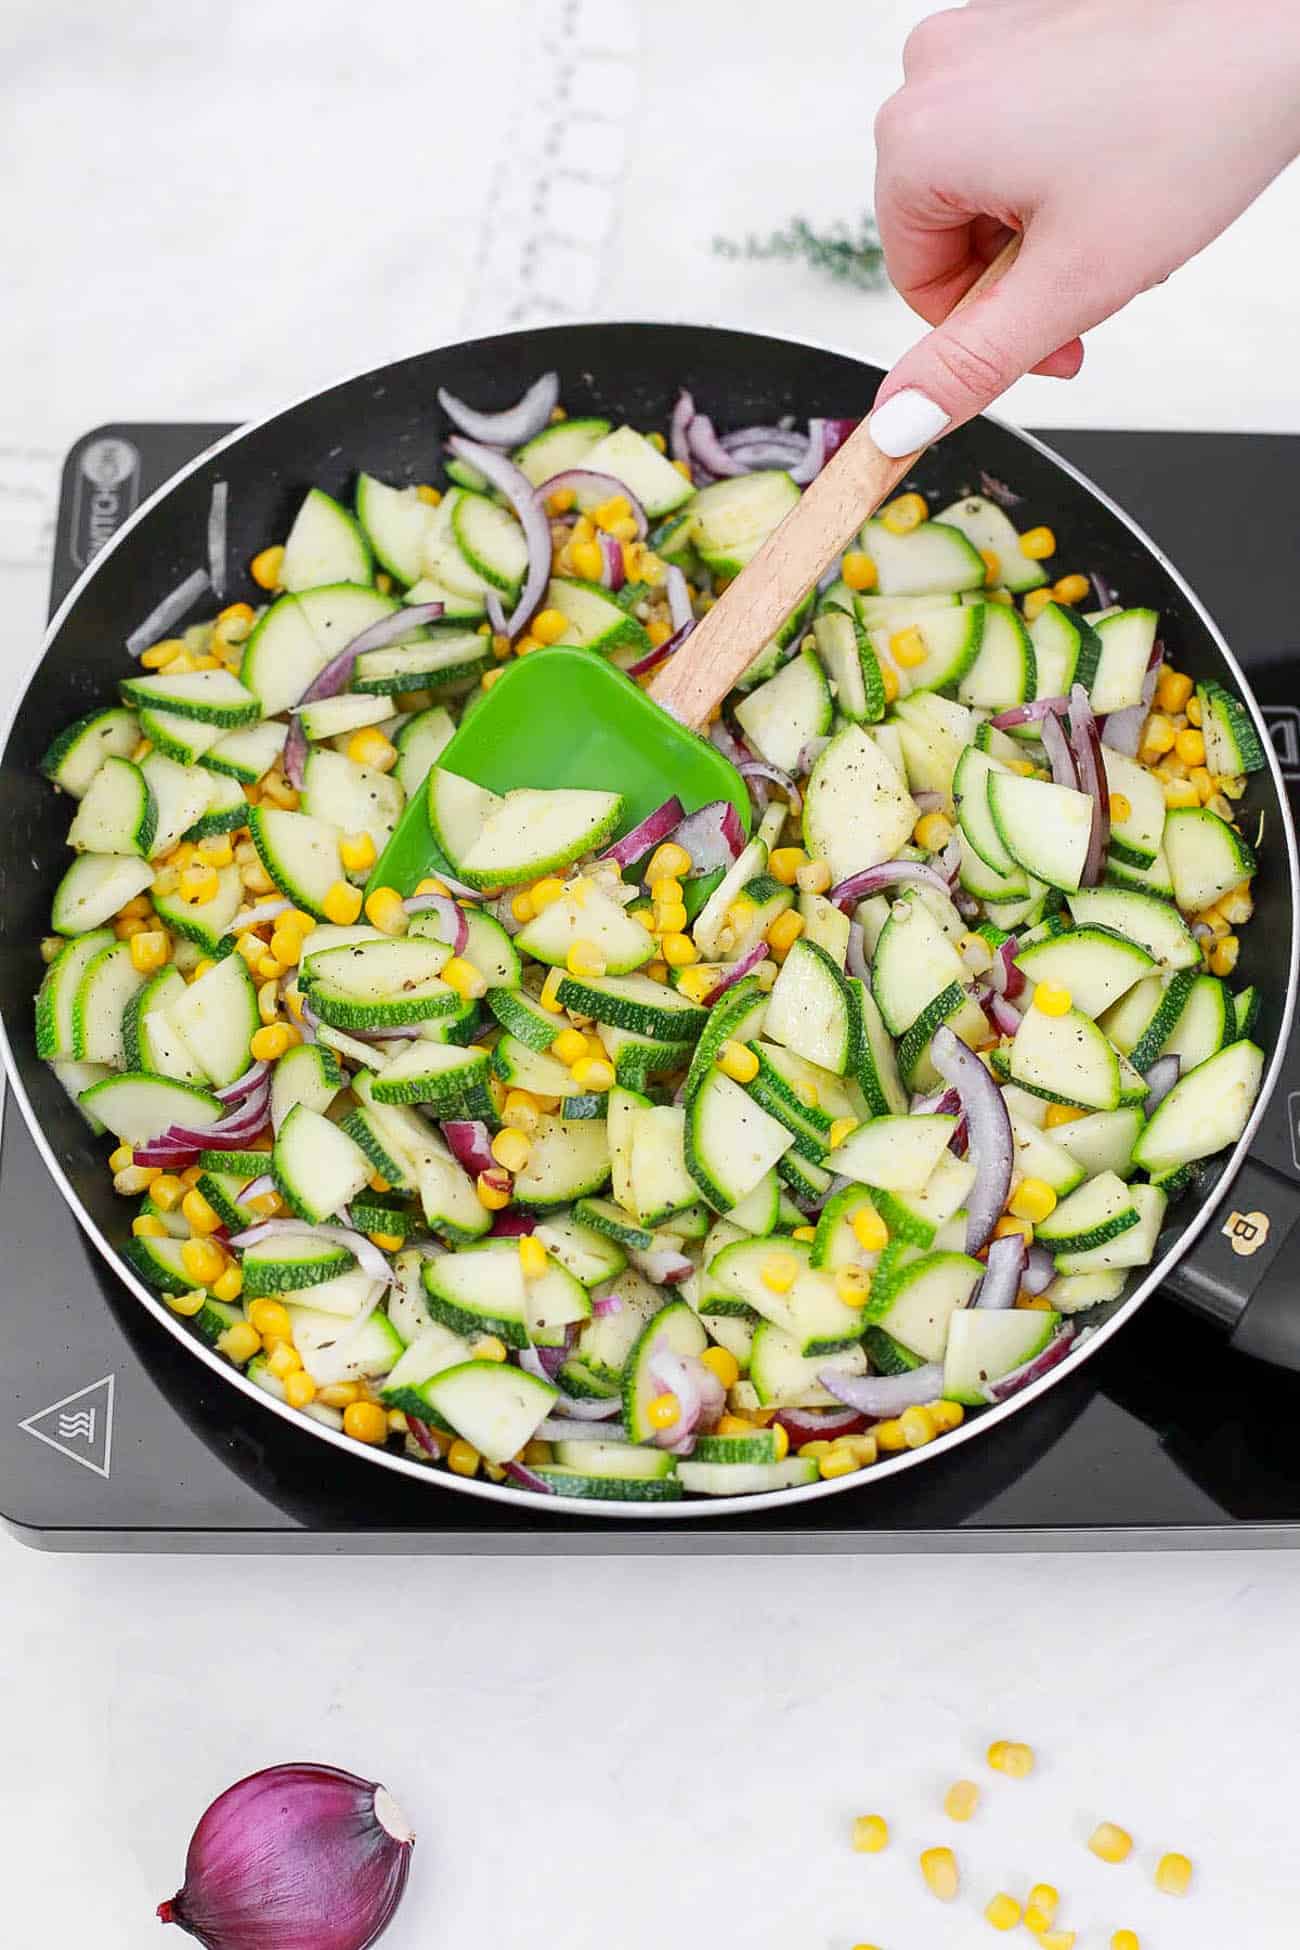 zucchini and veggies cooking on the stovetop